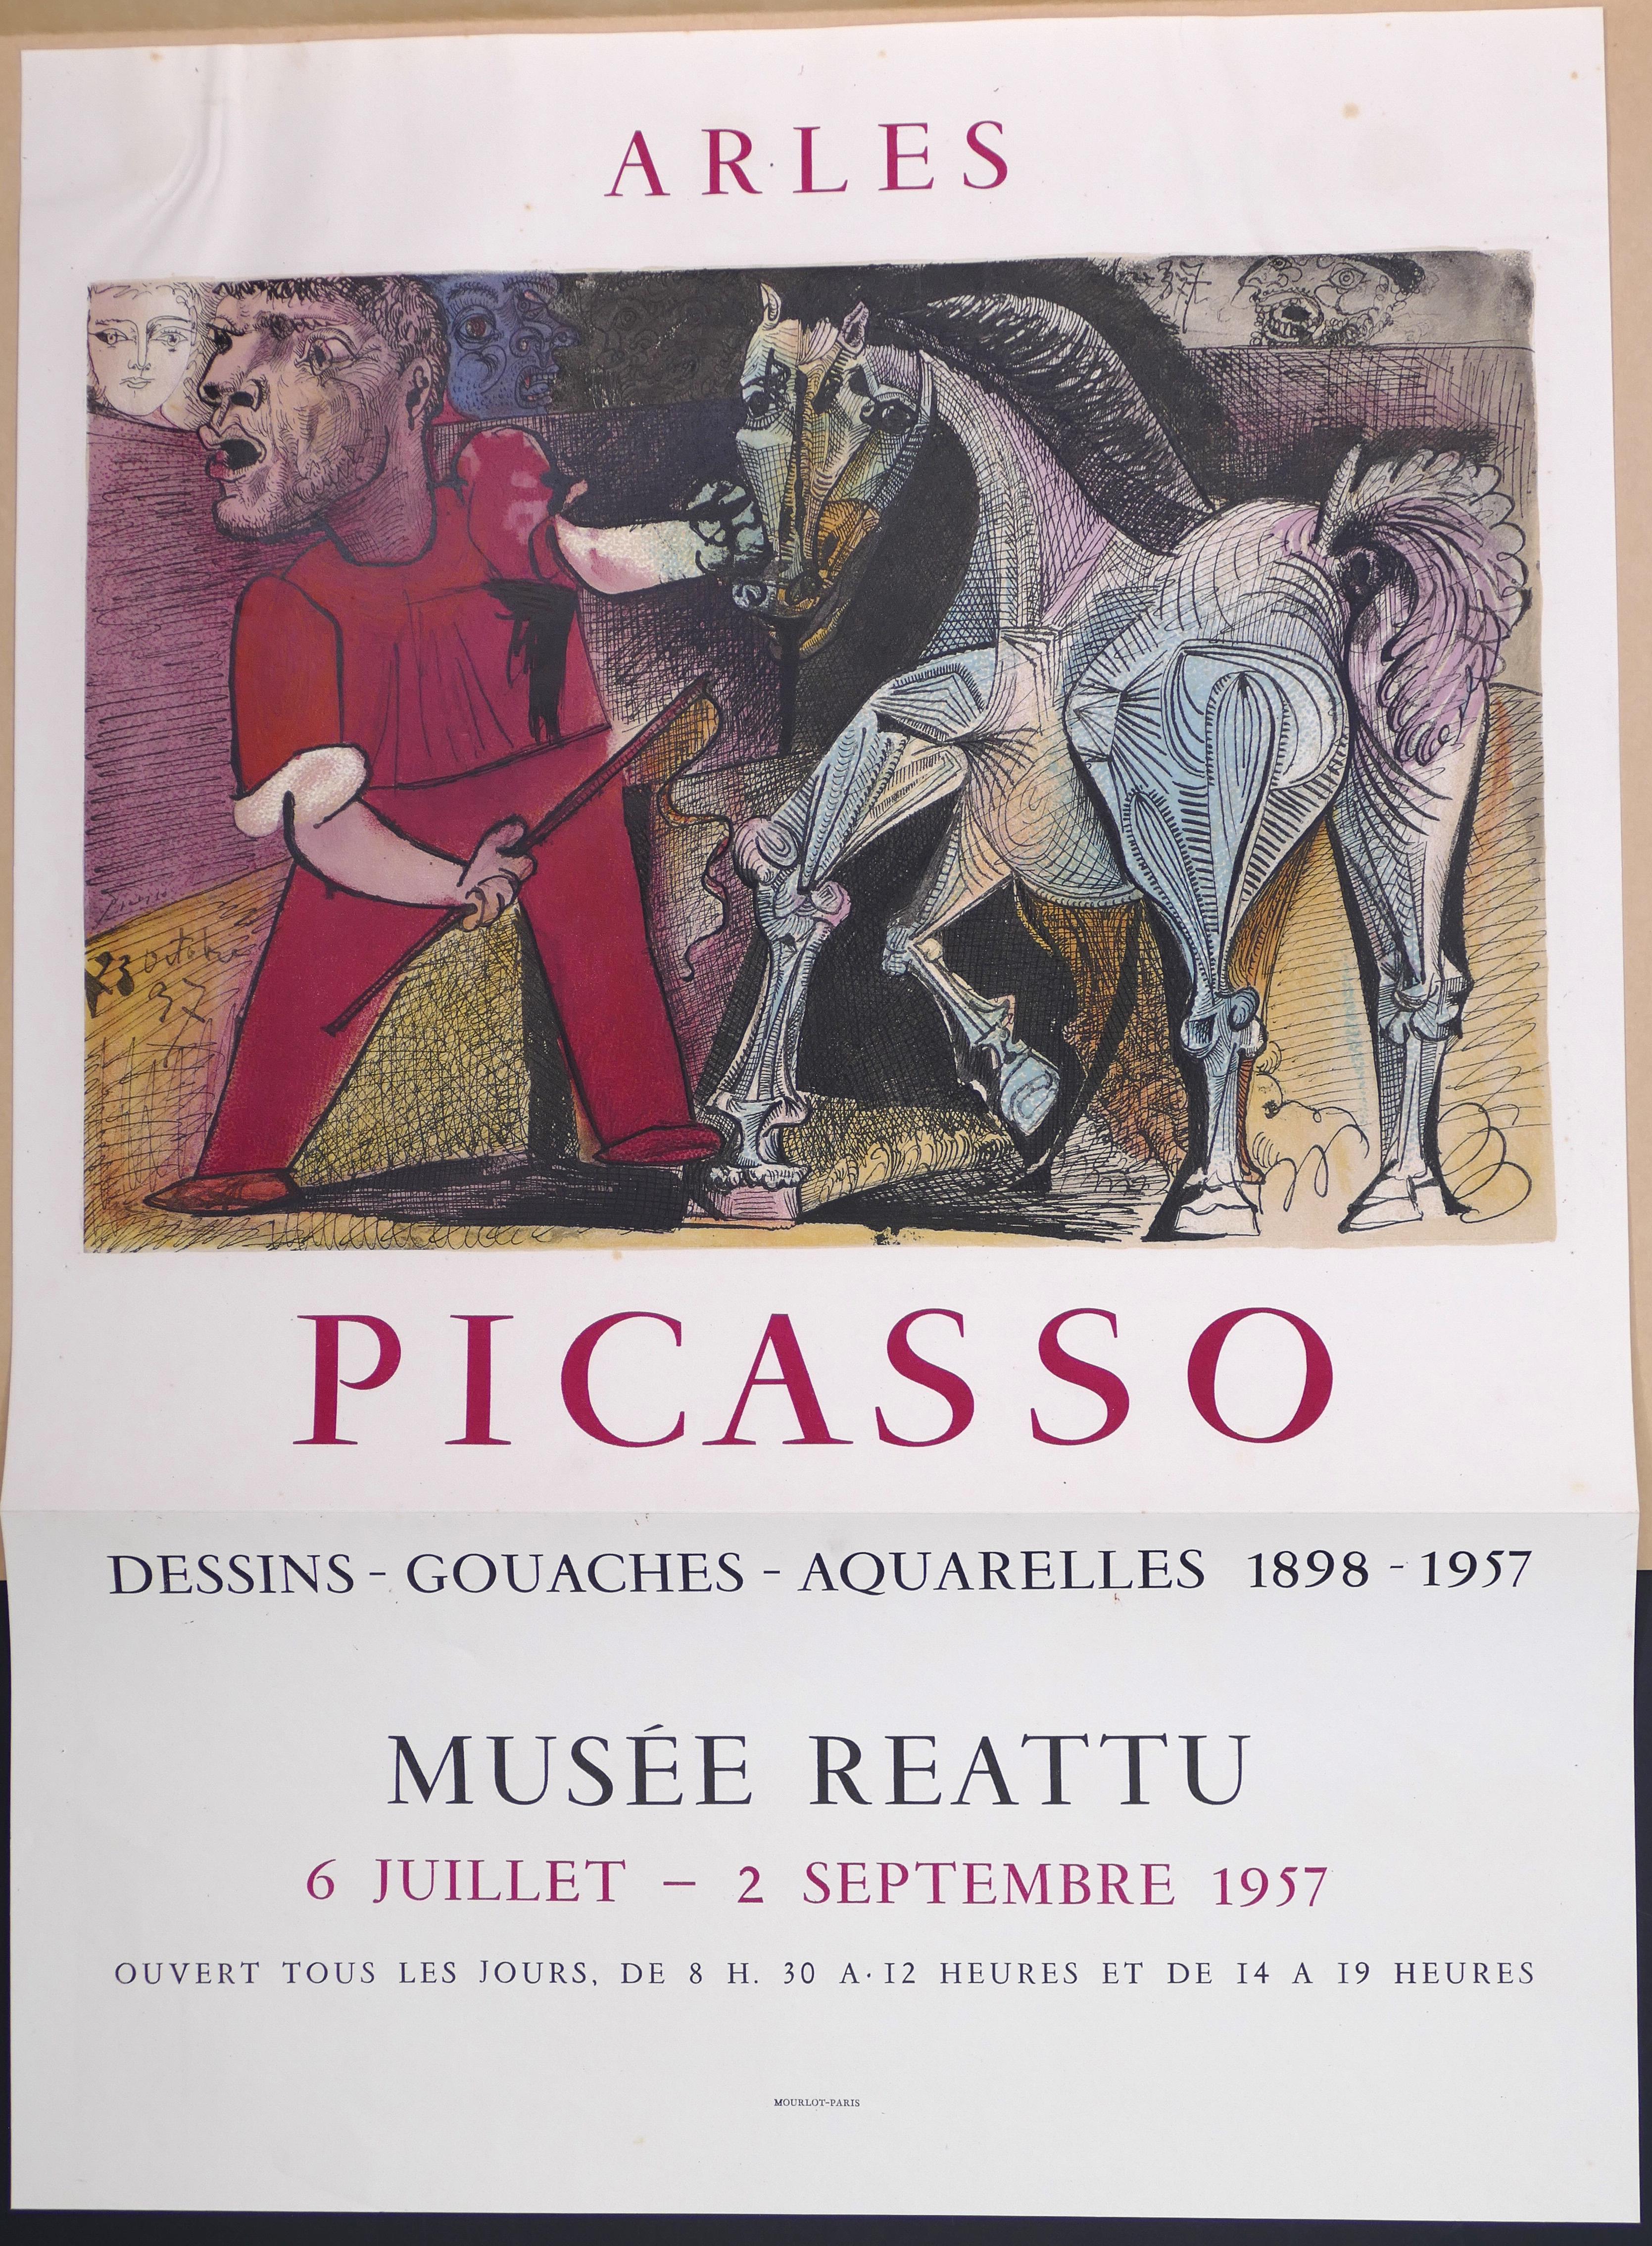 Picasso Vintage Exhibition Poster in Arles - 1957